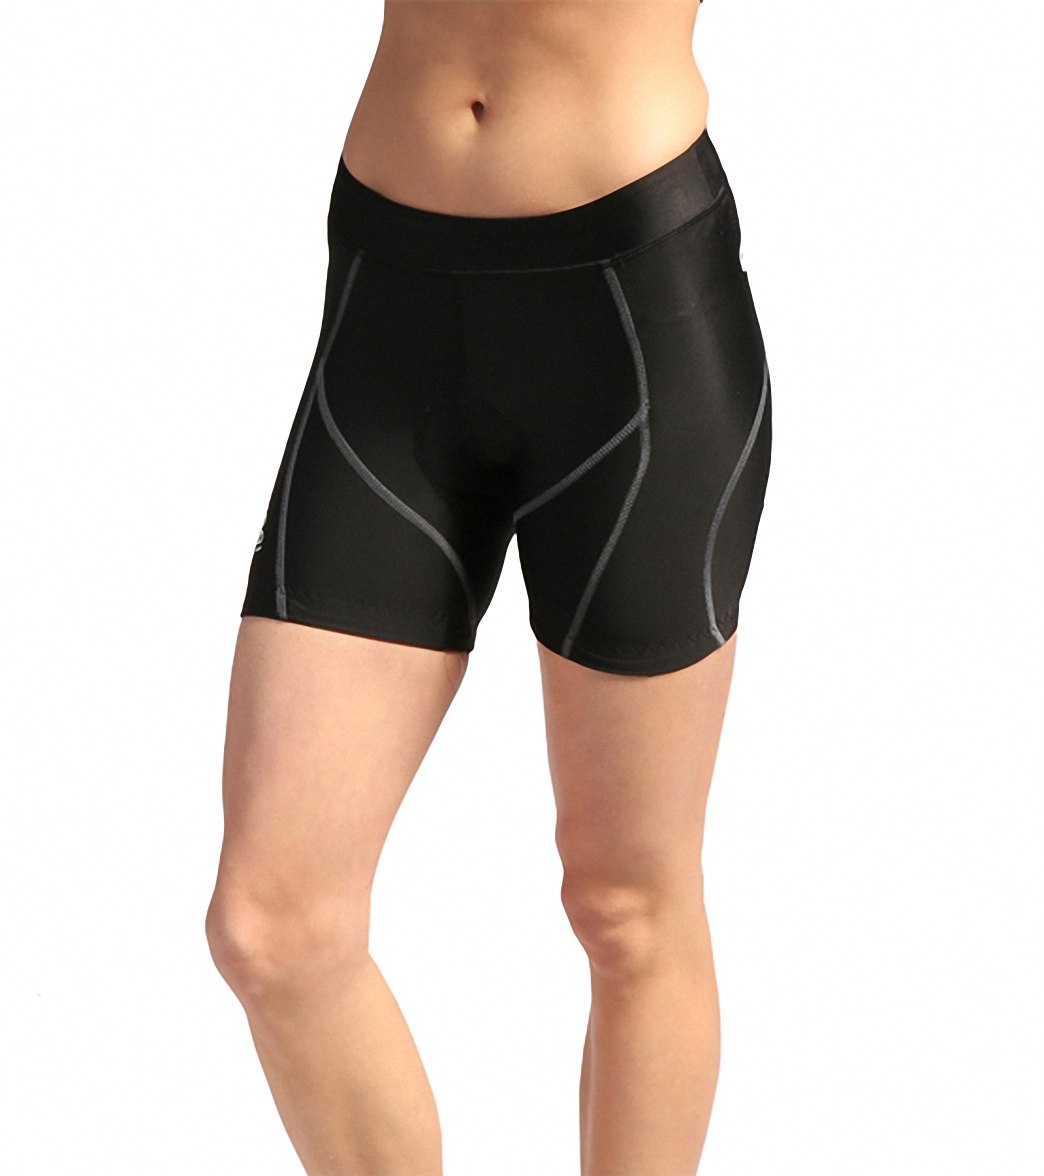 Sugoi Women's RS Shorty Cycling Shorts at SwimOutlet.com - Free Shipping